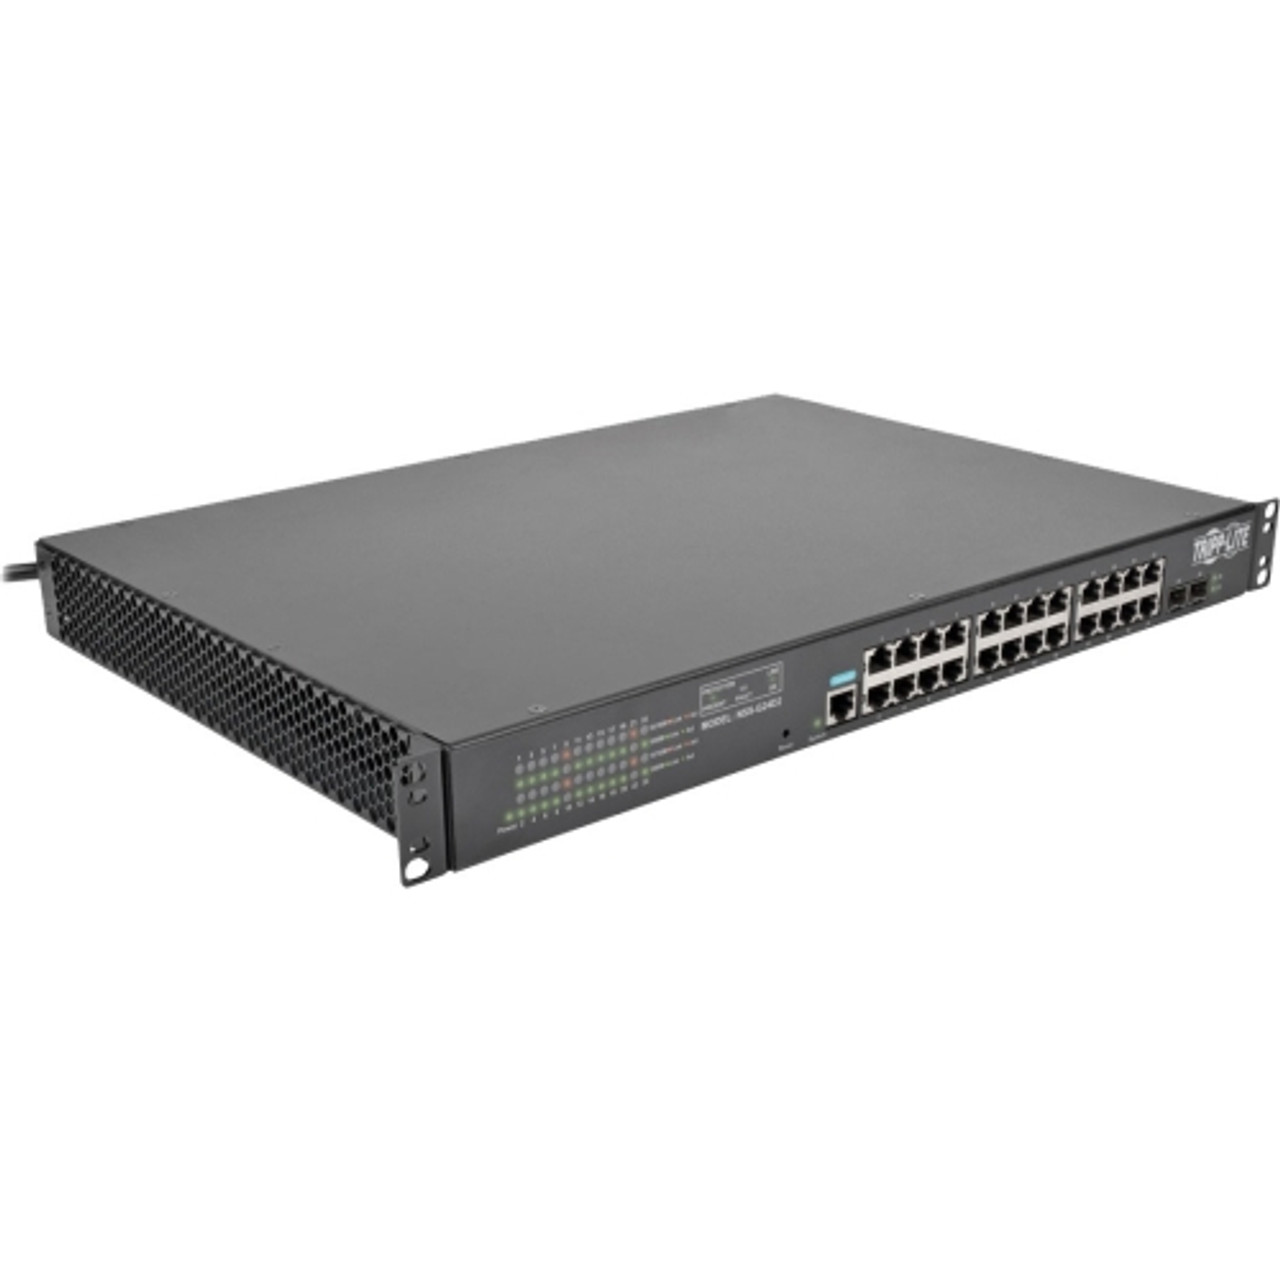 NSS-G24D2 TrippLite 24-Ports SFP 10/100/1000Mbps GbE Layer 2 Managed Switch (Refurbished)